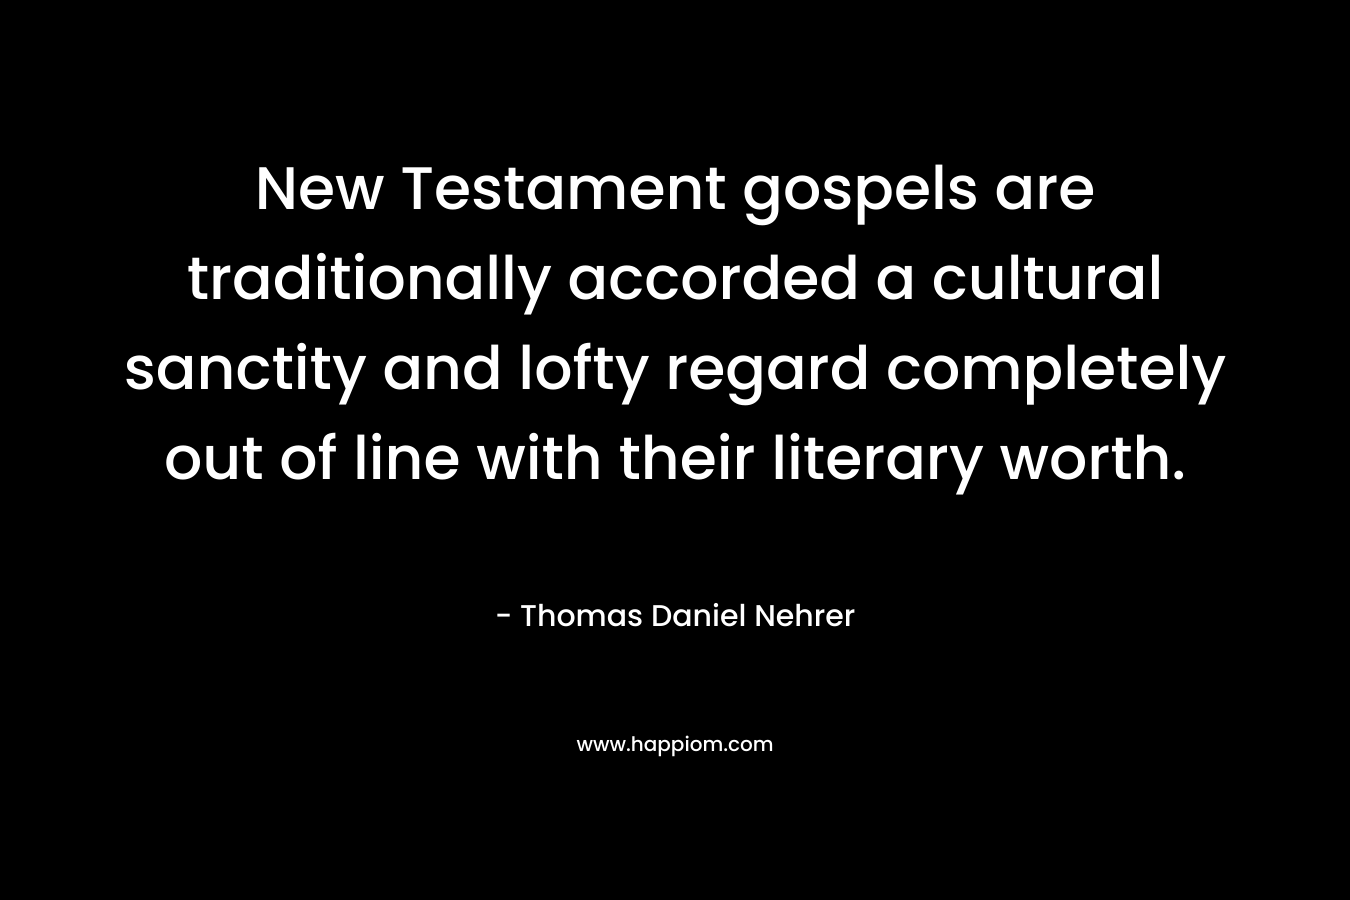 New Testament gospels are traditionally accorded a cultural sanctity and lofty regard completely out of line with their literary worth.